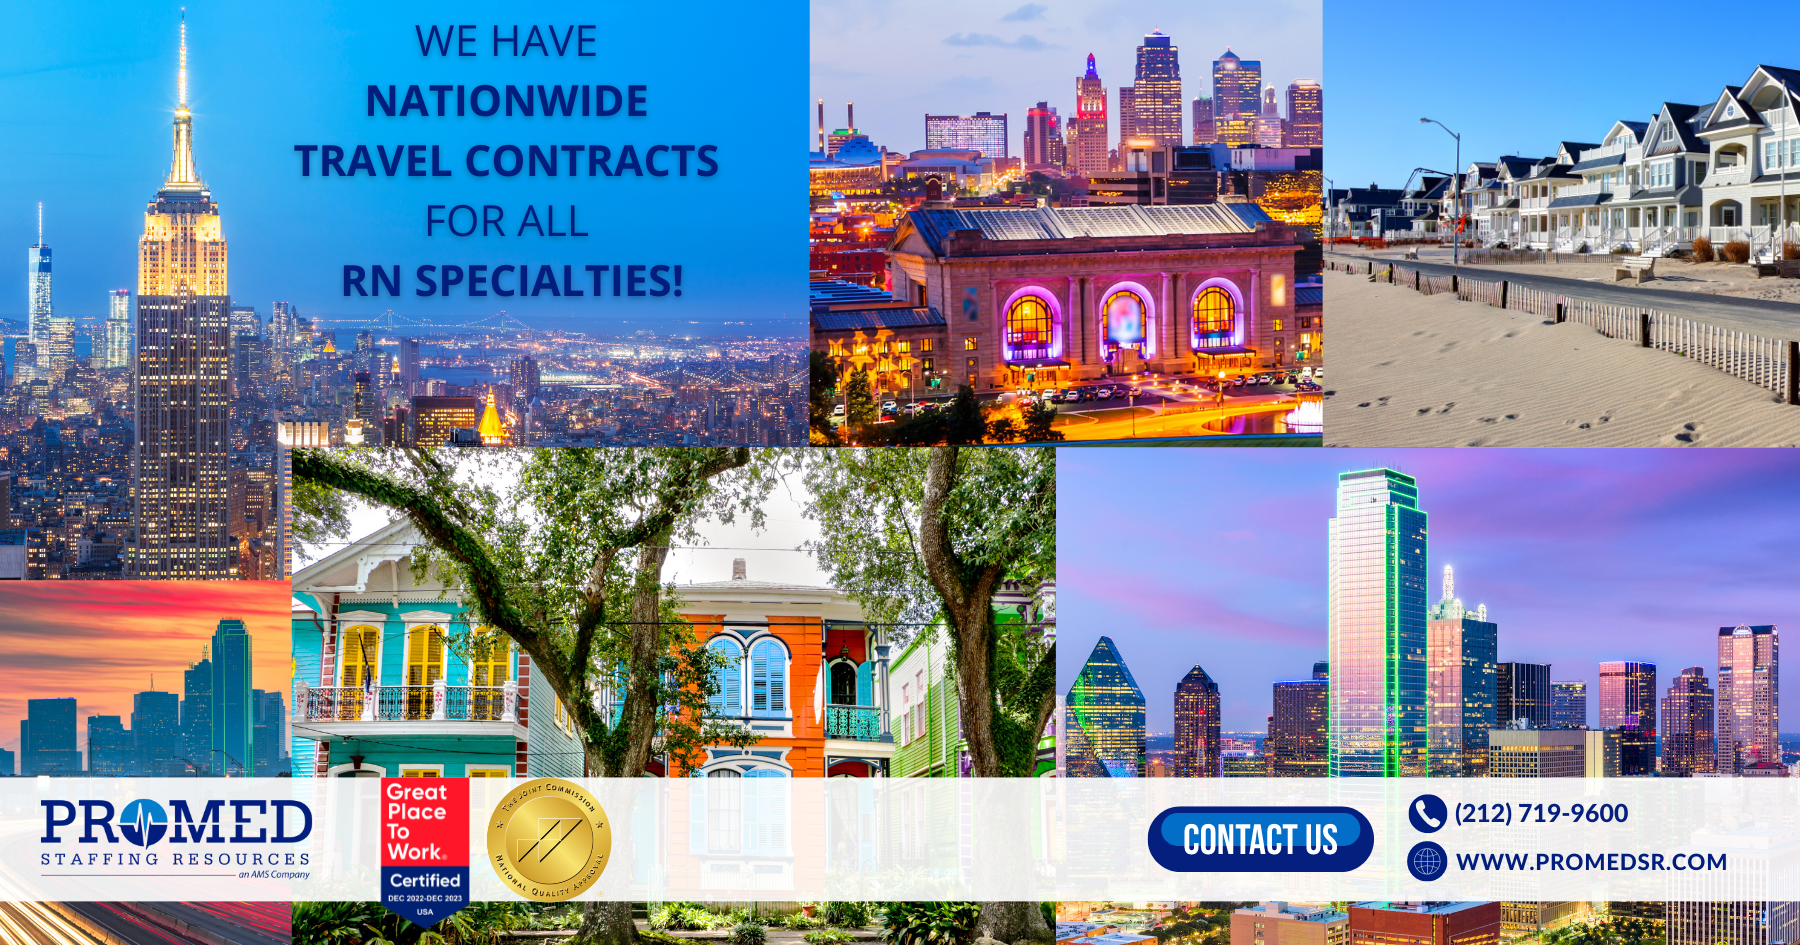 Travel Nurses, we have nationwide travel contracts for all RN specialties!